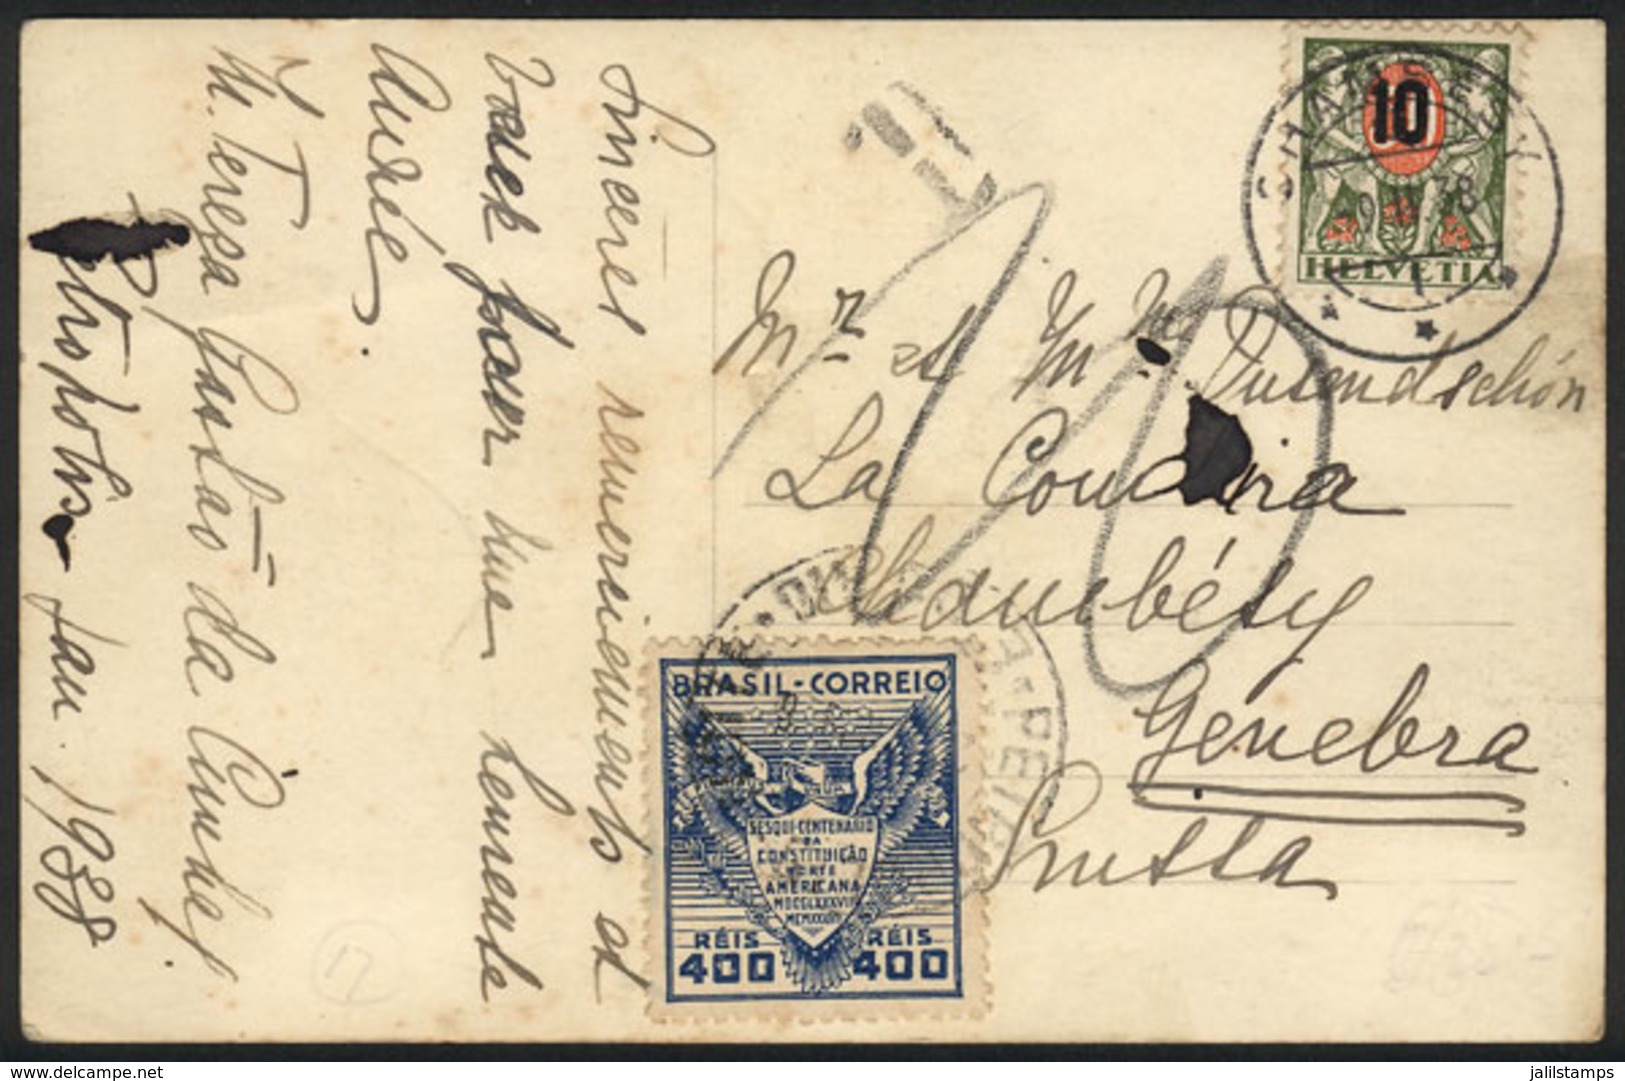 BRAZIL: Postcard Sent From Petropolis To Switzerland On 9/JA/1938, Franked By RHM-C126 ALONE, Upon Arrival It Received A - Prefilatelia